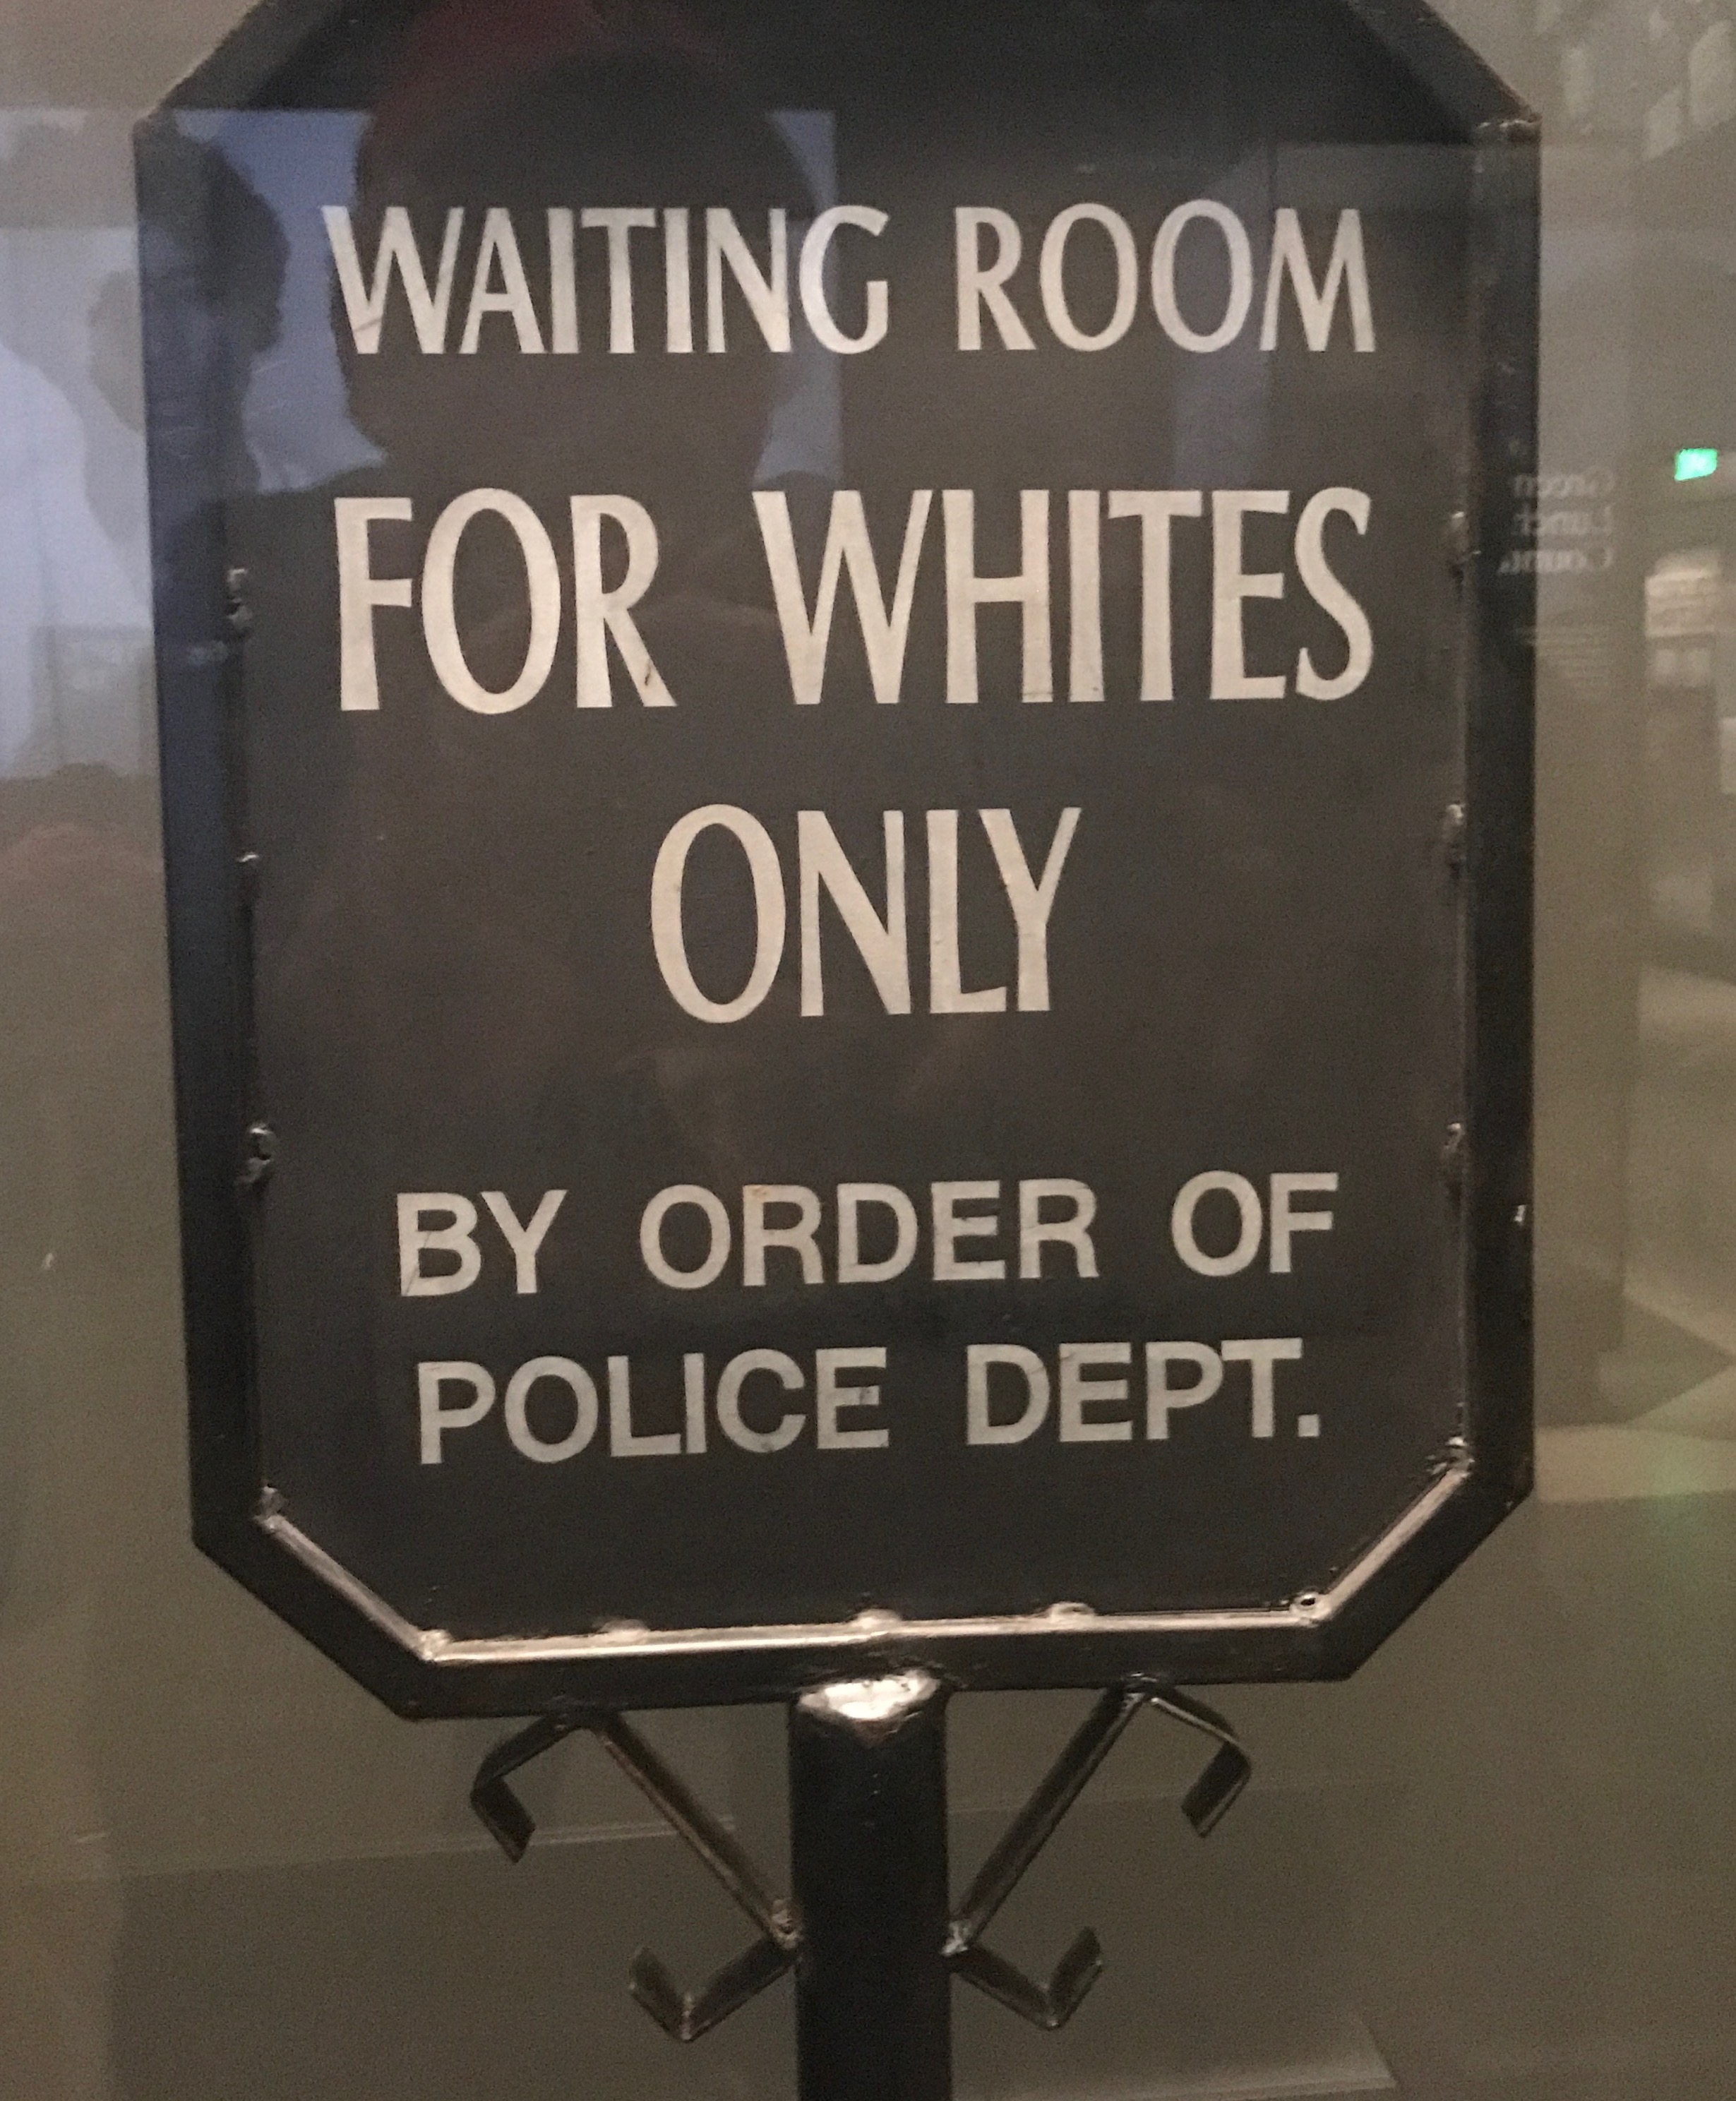  A sign from the Jim Crow South on display at the National Museum of African American History and Culture in Washington, DC.      